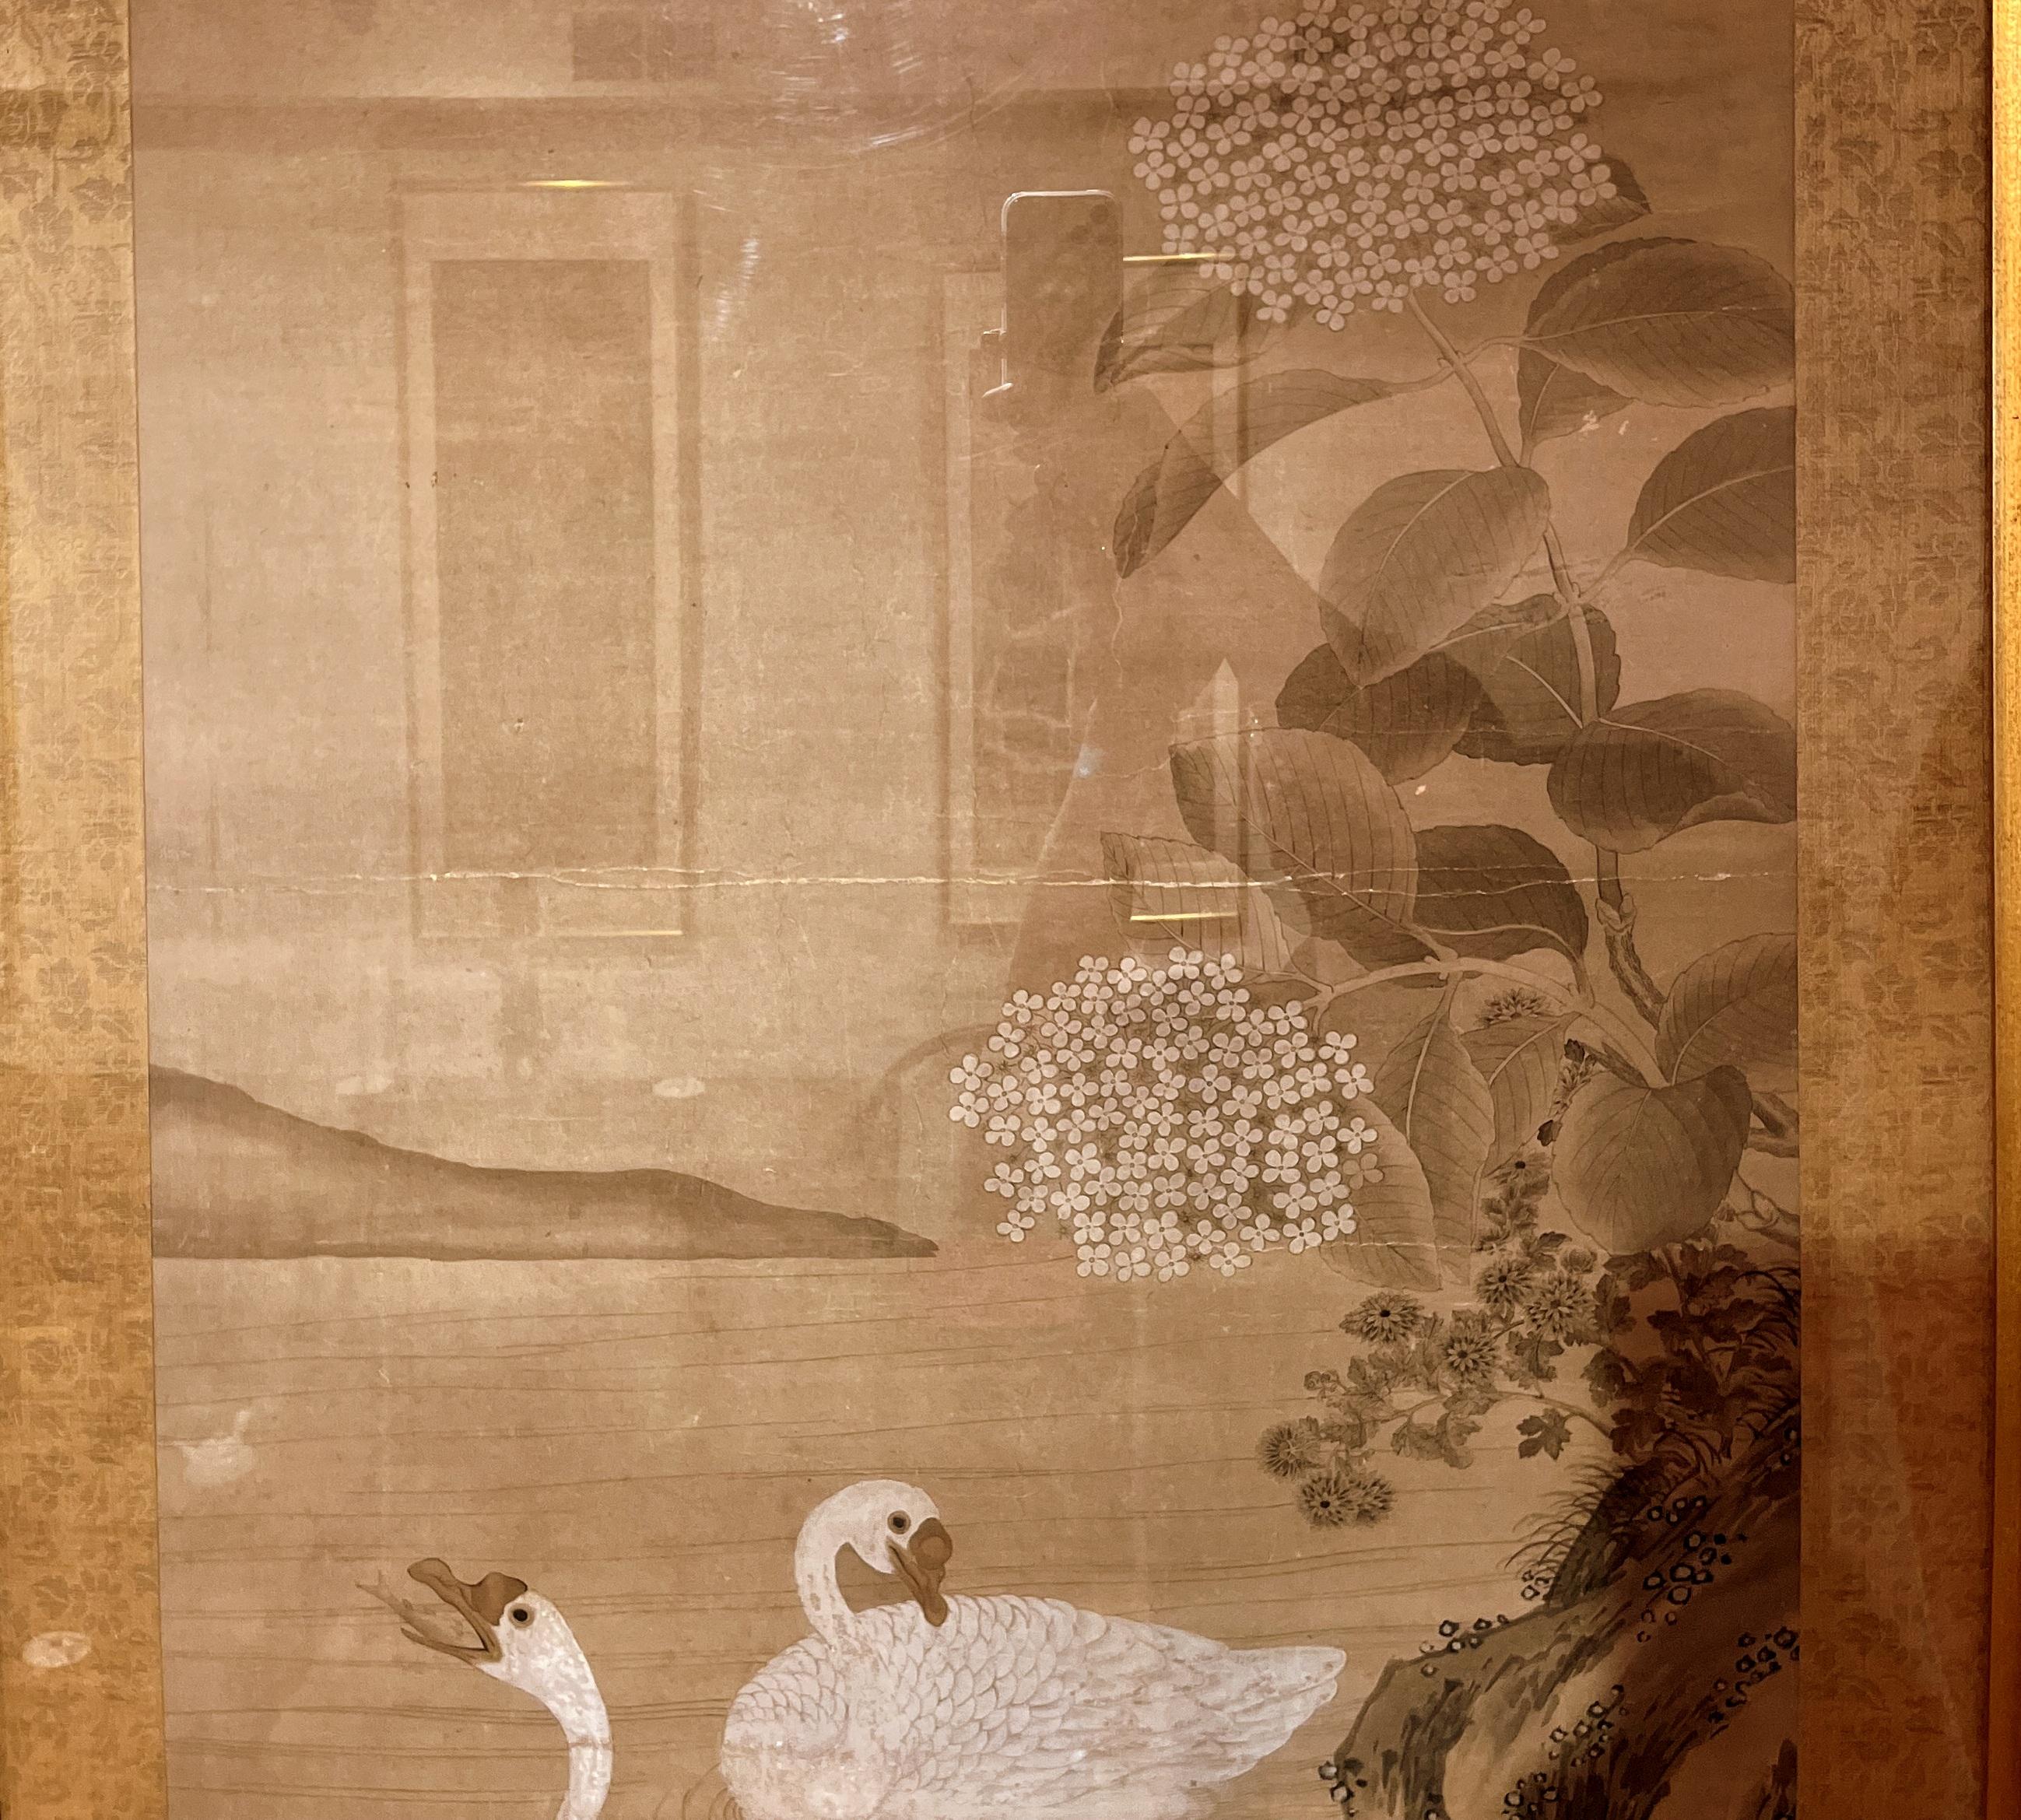 Hand-Painted Framed Japanese Brush Painting of Two White Geese Swimming in a Pond For Sale